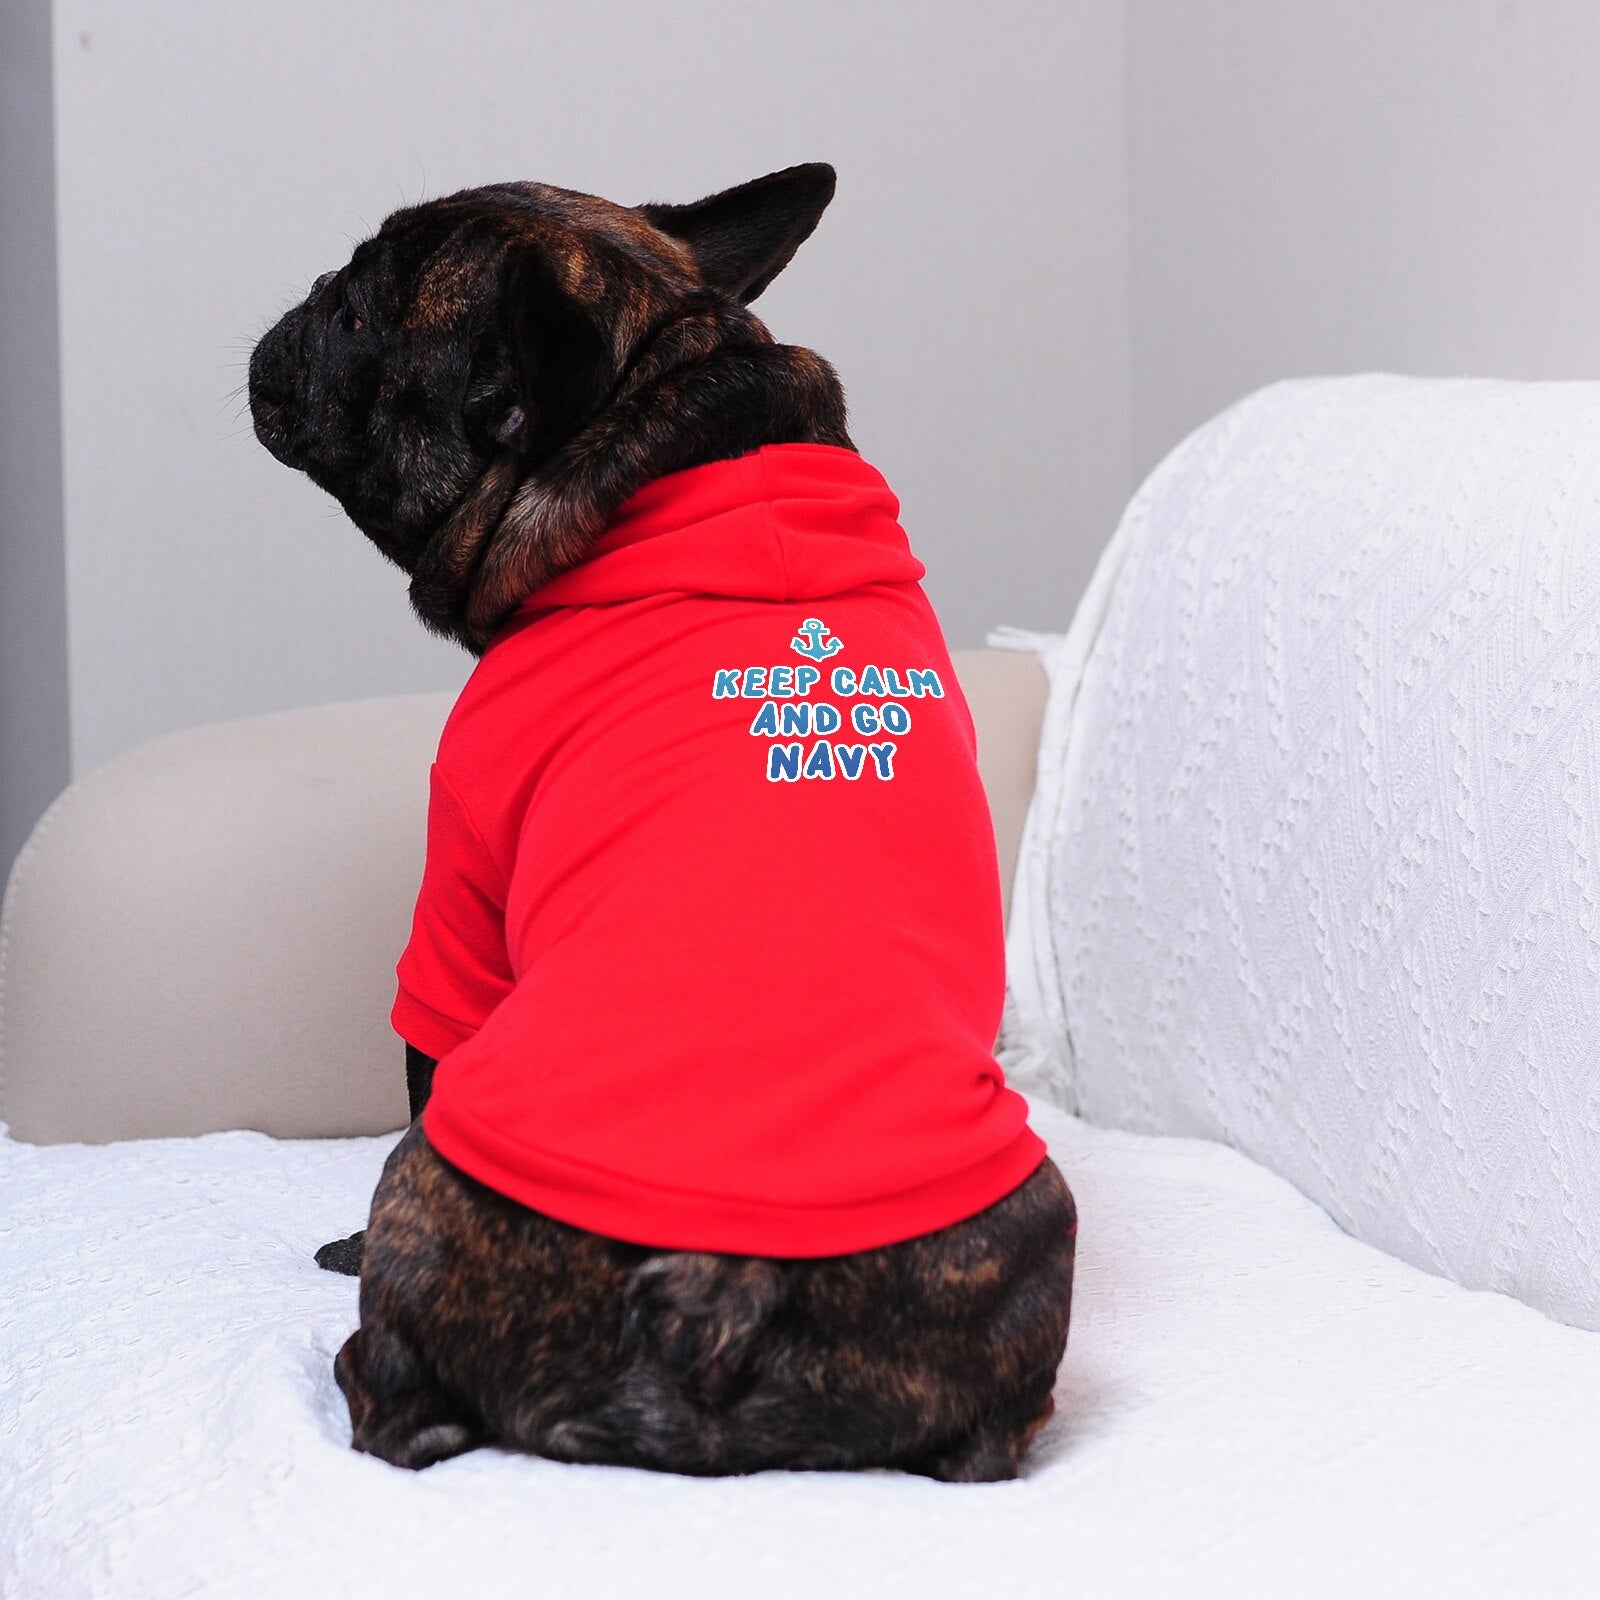 Classic Cute Dog Hoodie Pet Clothes Cotton Fabric, Stripe White and Red, Blue Letter Printed on the Back